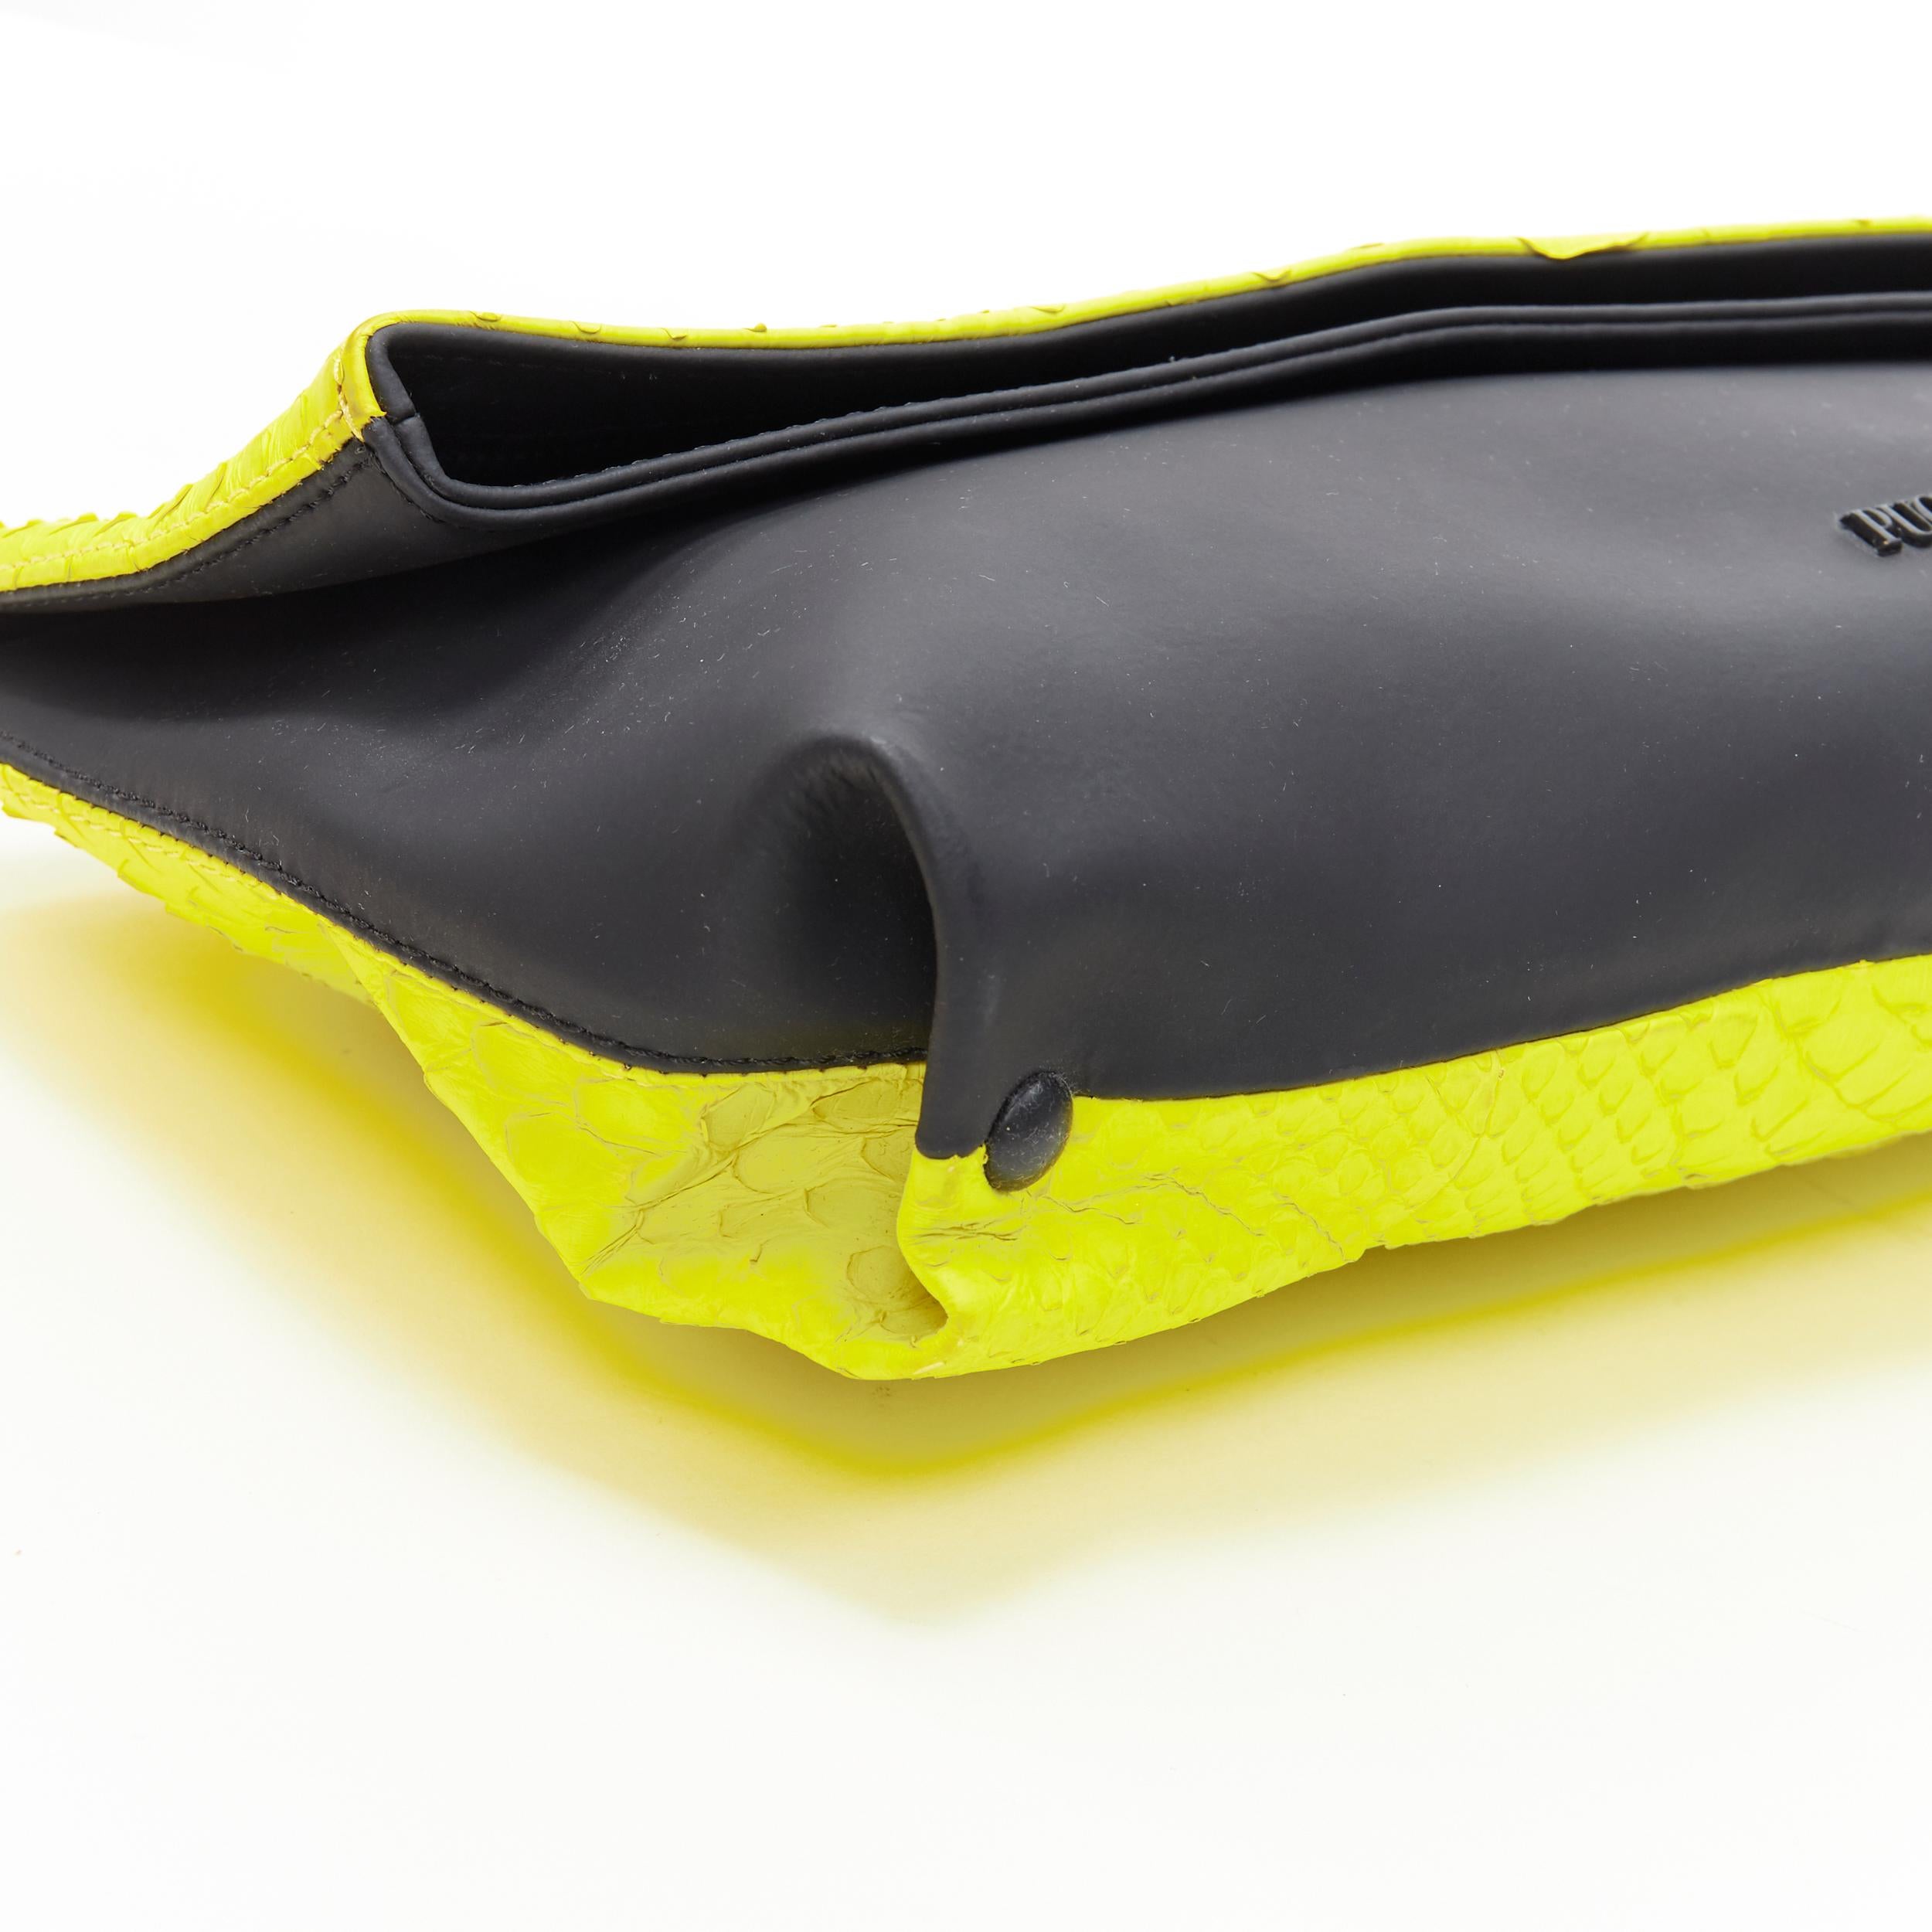 Women's EMILIO PUCCI neon yellow scaled pleather black rubber fold over clutch bag